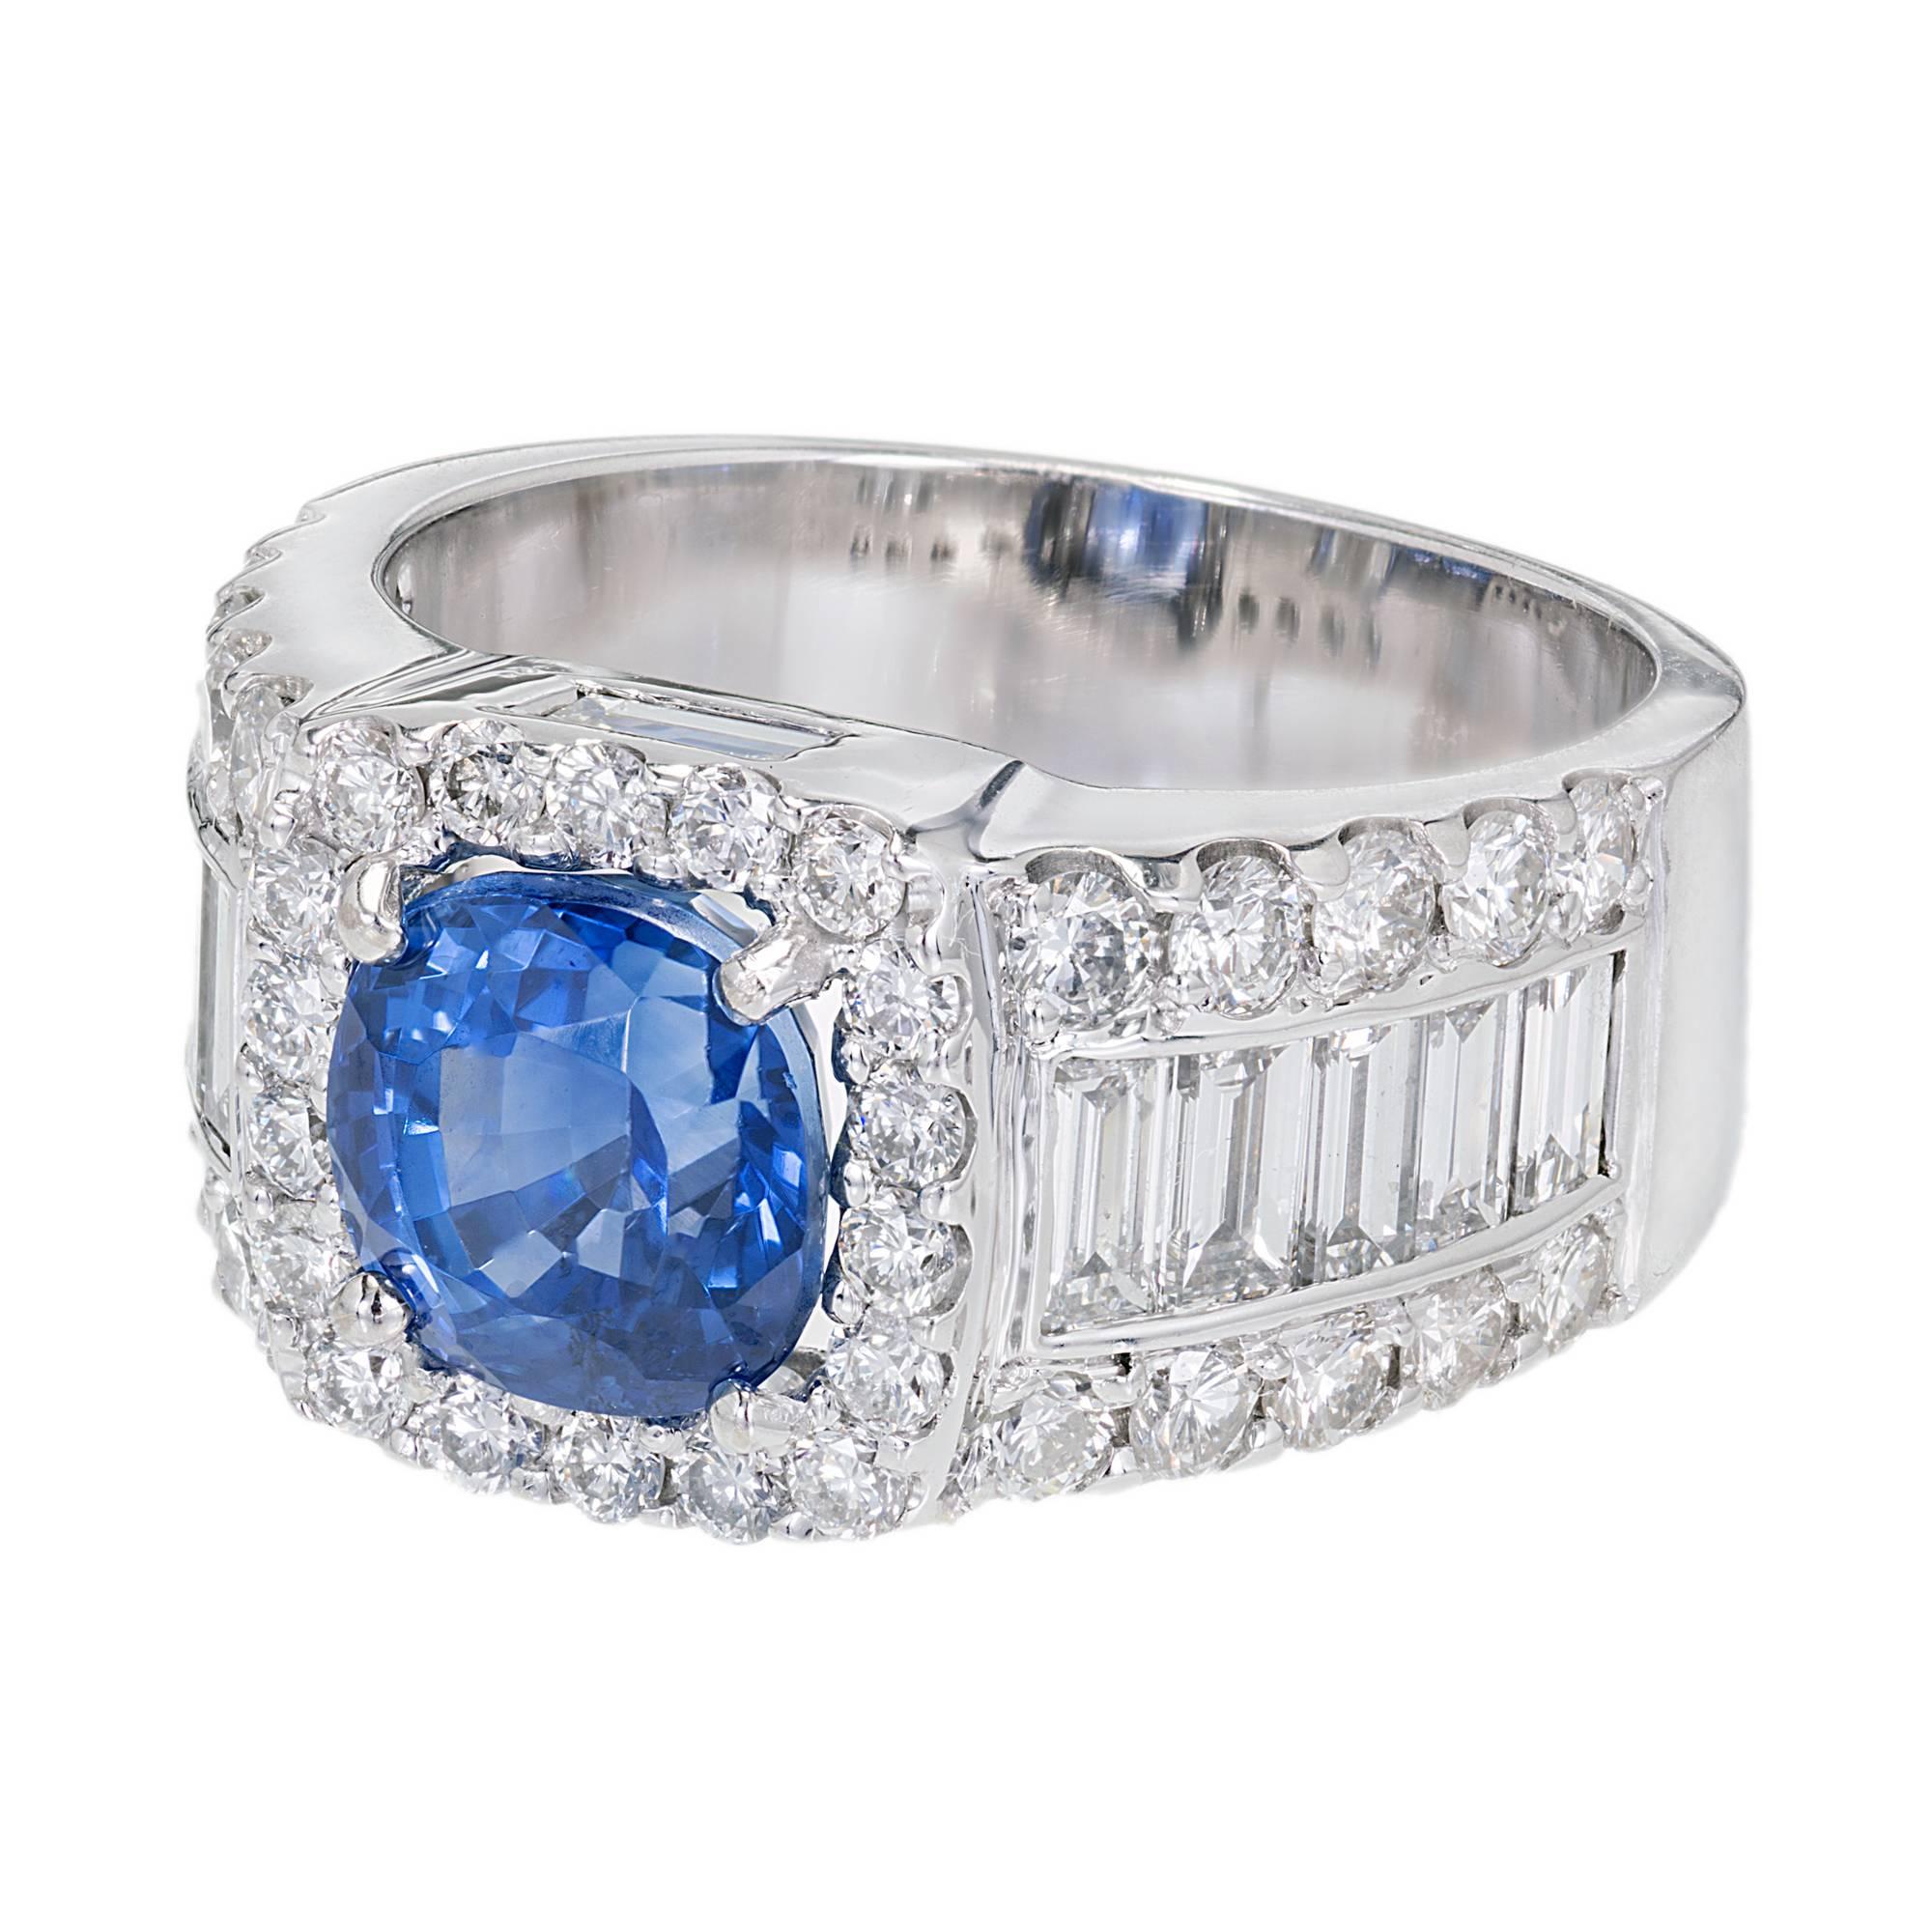 Bright cornflower blue cushion Sapphire engagement ring. In a custom made setting with a cushion shape top and wide sides set with bright shiny colorless Diamonds.

1 round bright cornflower blue Sapphire, approx. total weight 3.07cts, VS, GIA